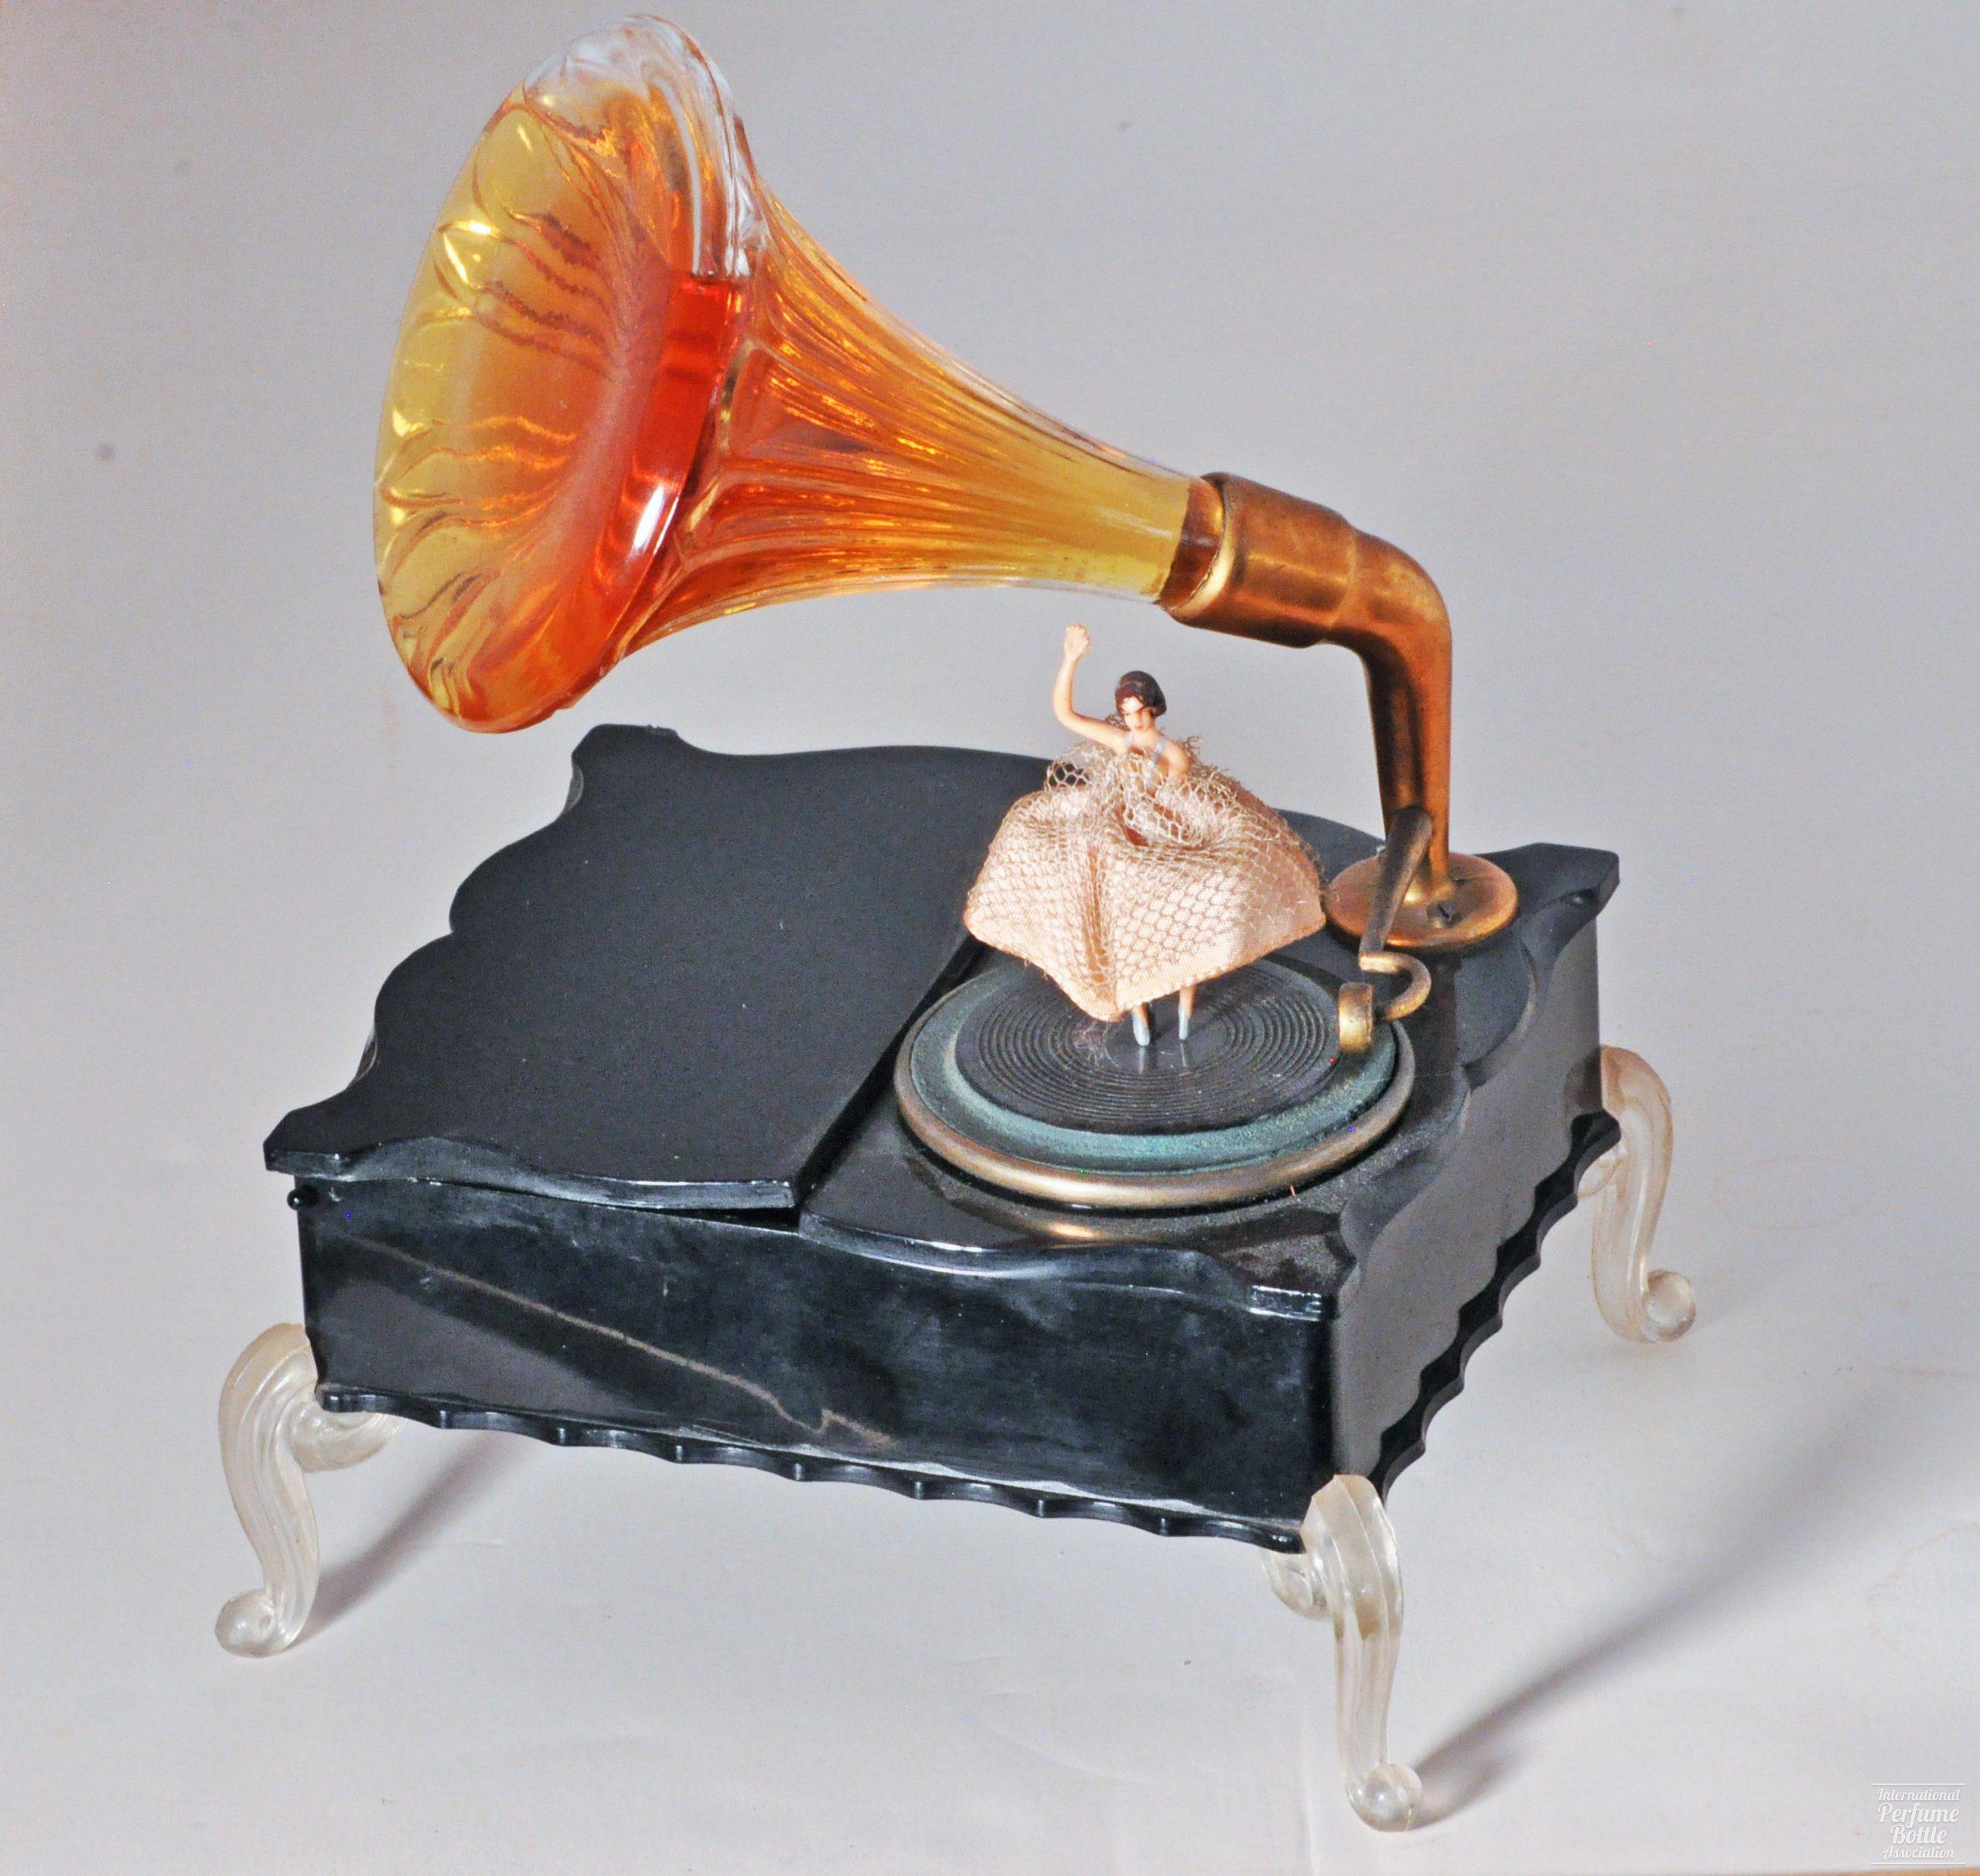 "Agrement" Music Box with Dancing Ballerina by Rudy